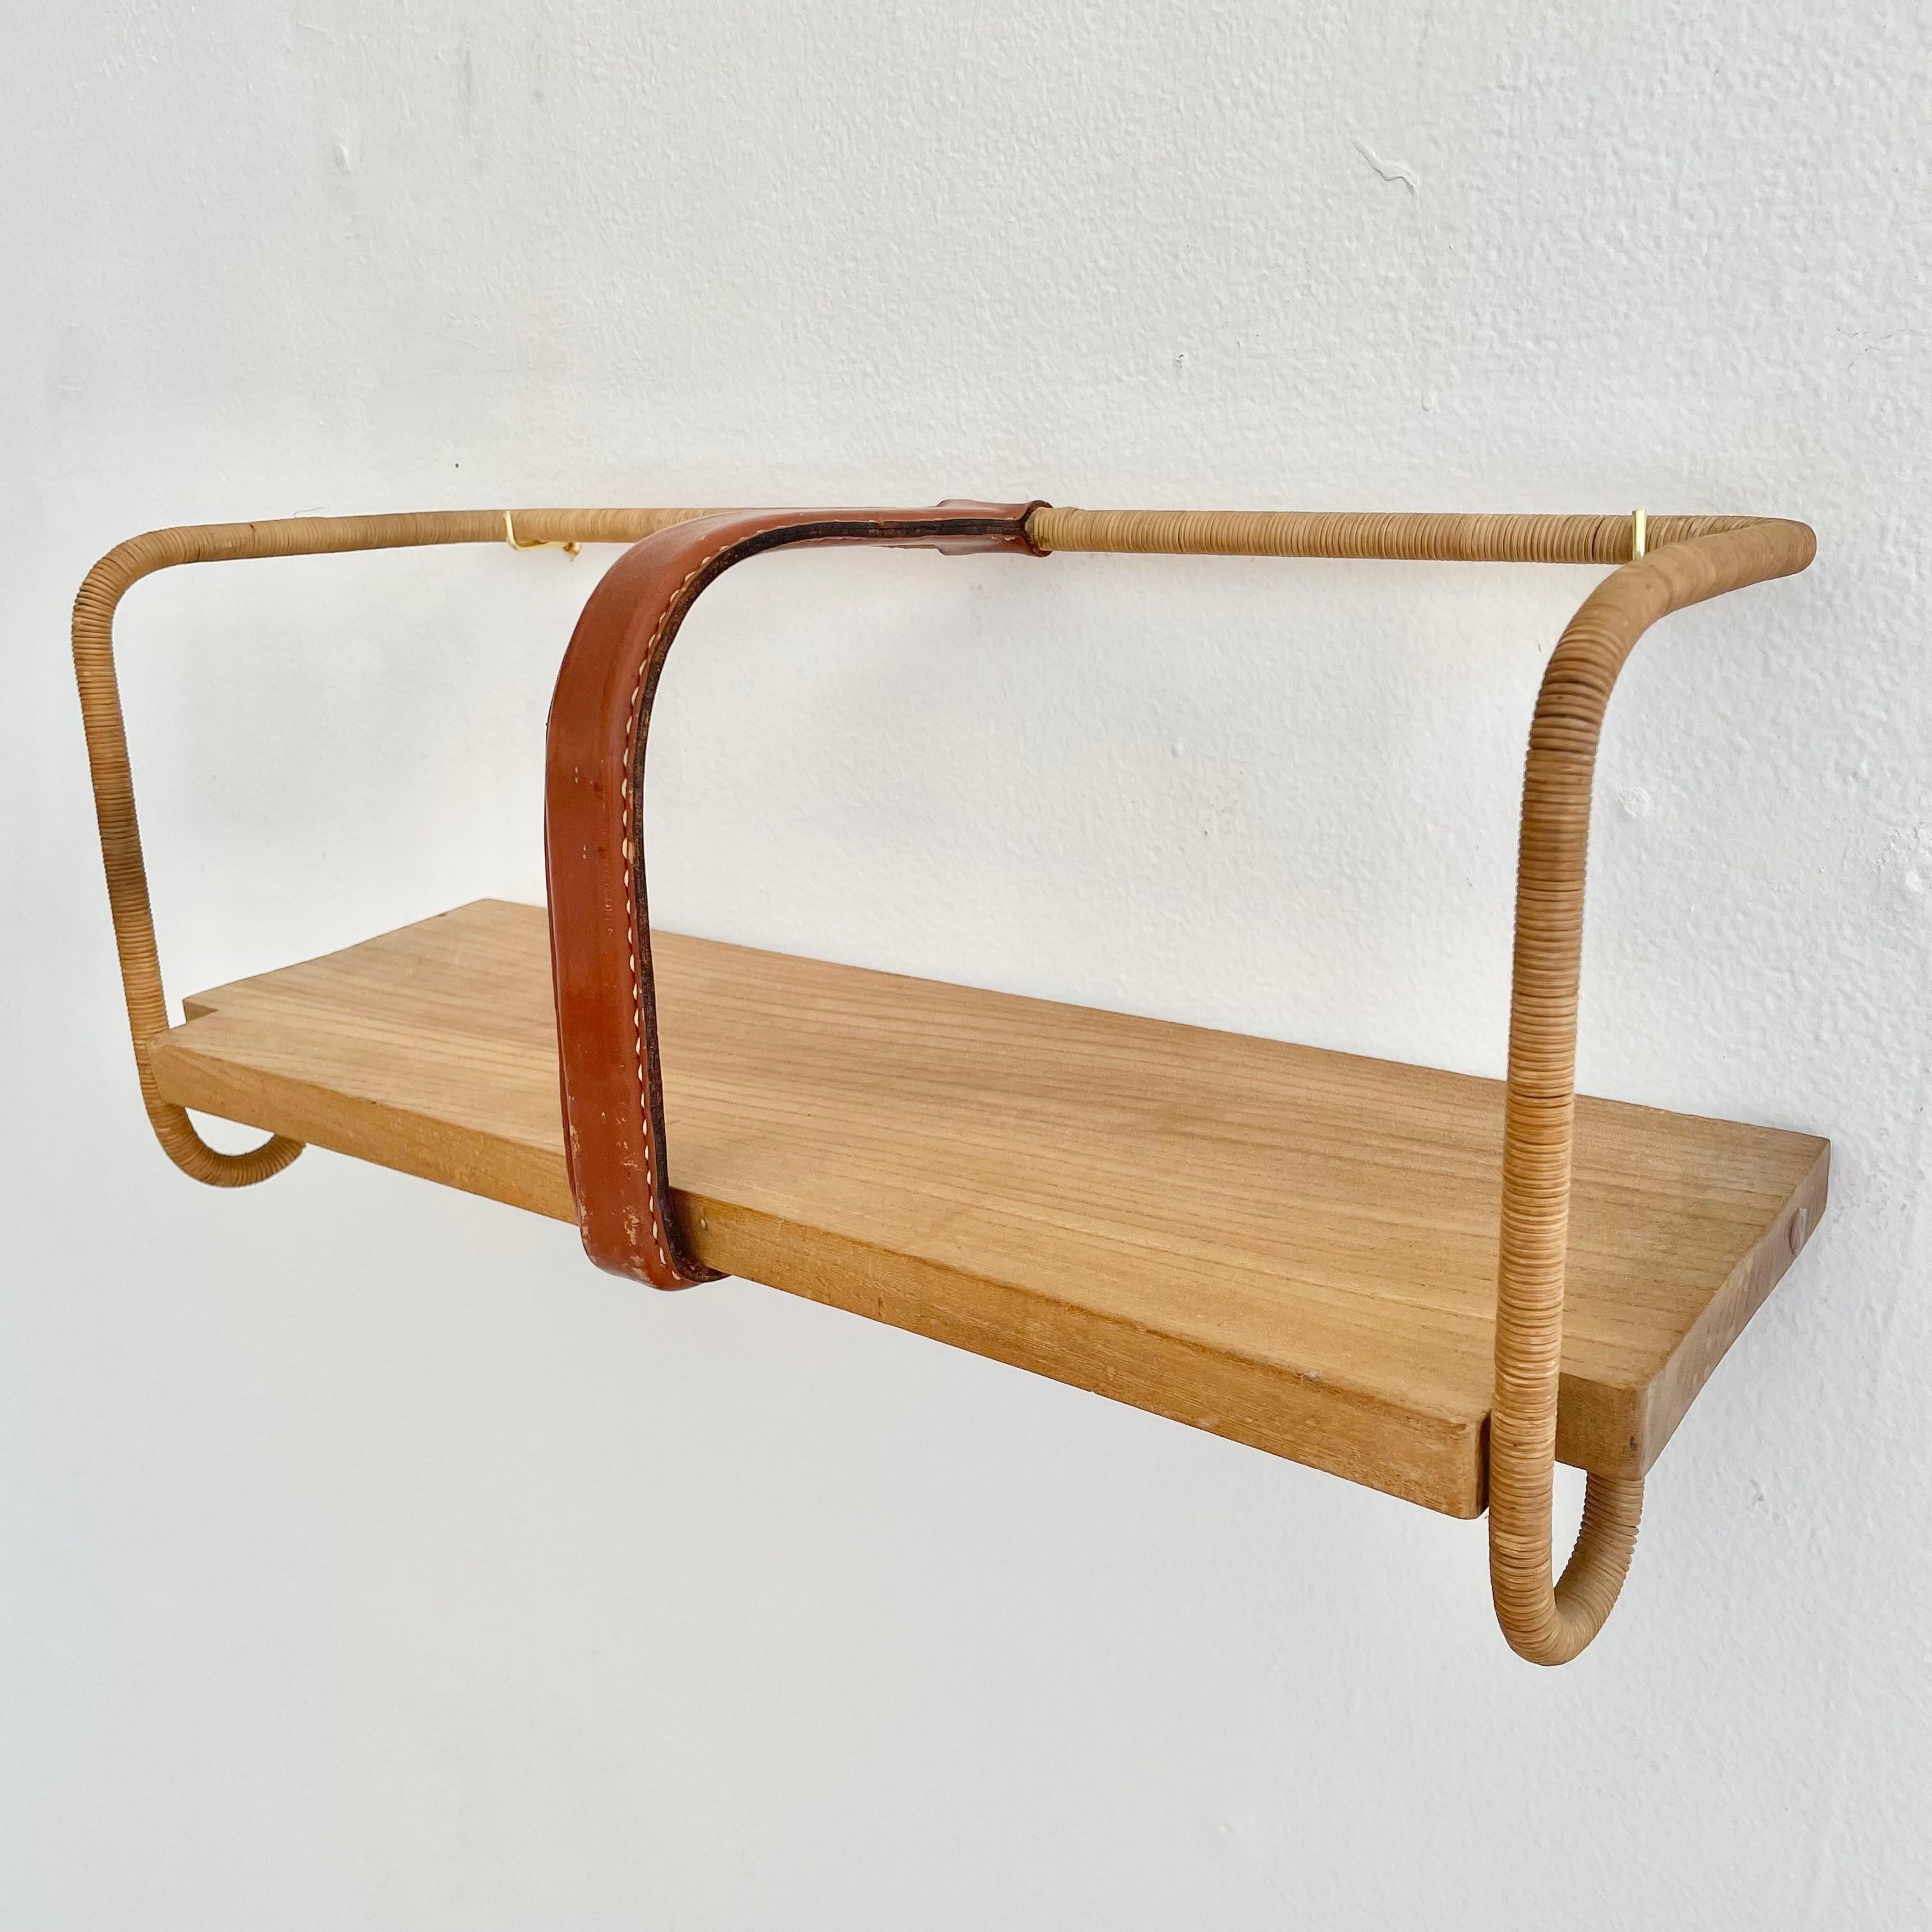 French Jacques Adnet Leather, Wood and Twine Shelf, 1950s France For Sale